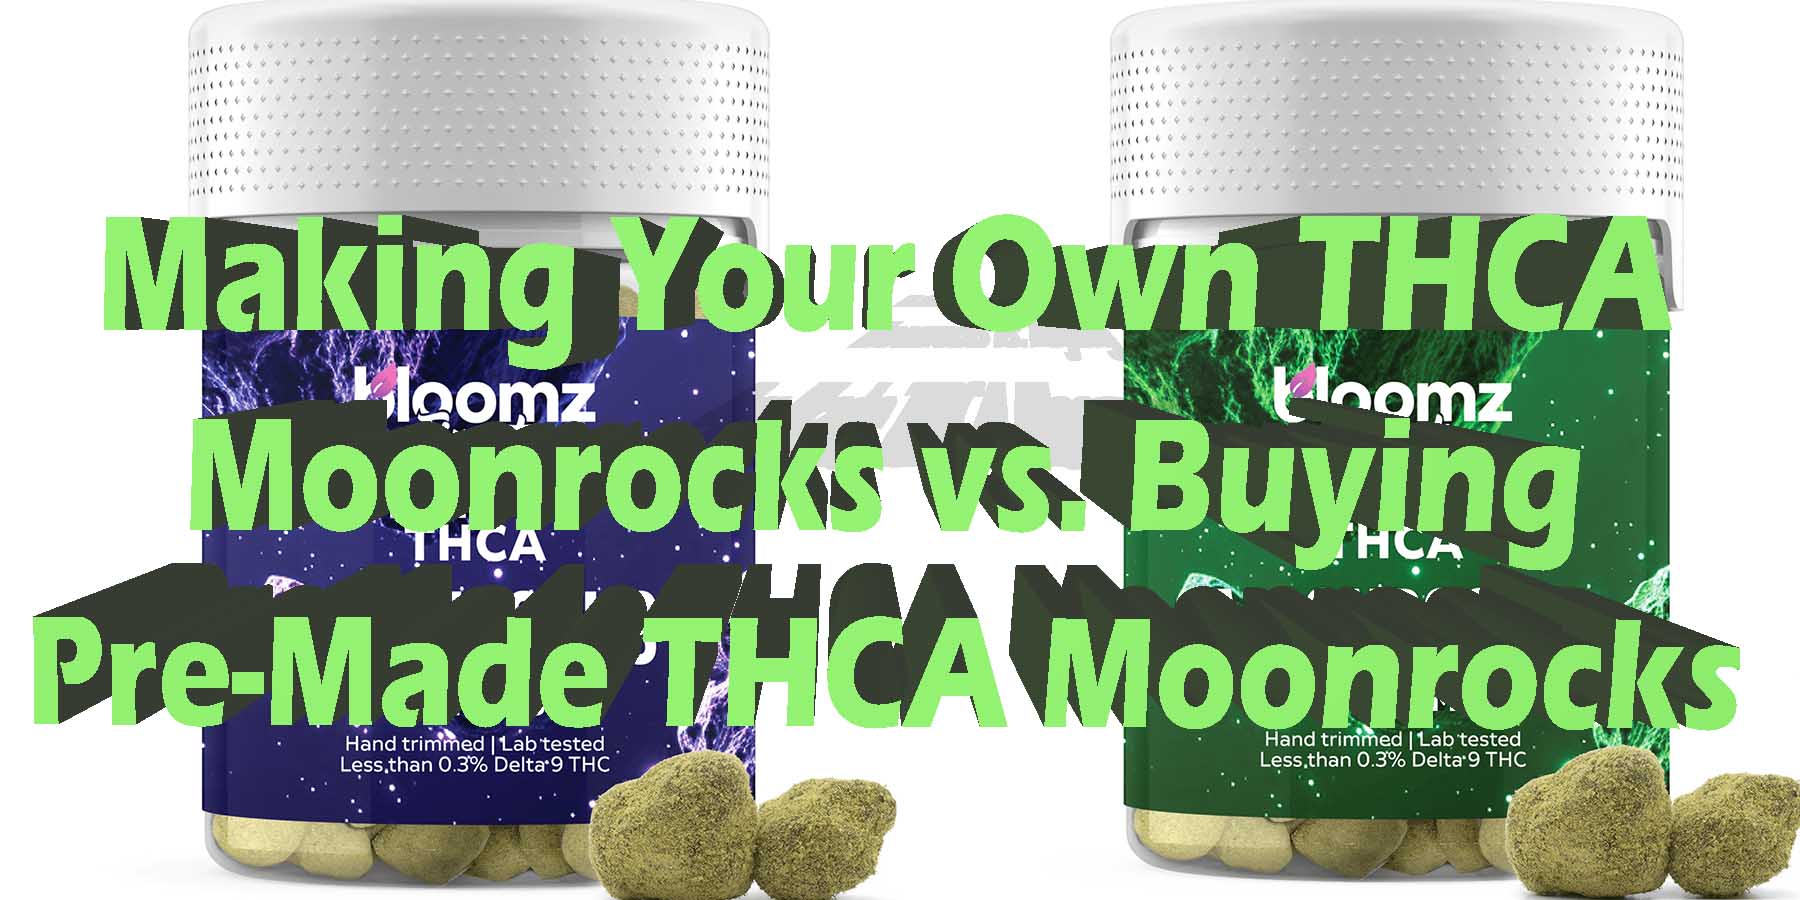 Making Your Own THCA Moonrocks vs buying or pre made Moonrocks Better LowestPrice Coupon Discount For Smoking Best High Smoke Shop online Near Me-Bloomz